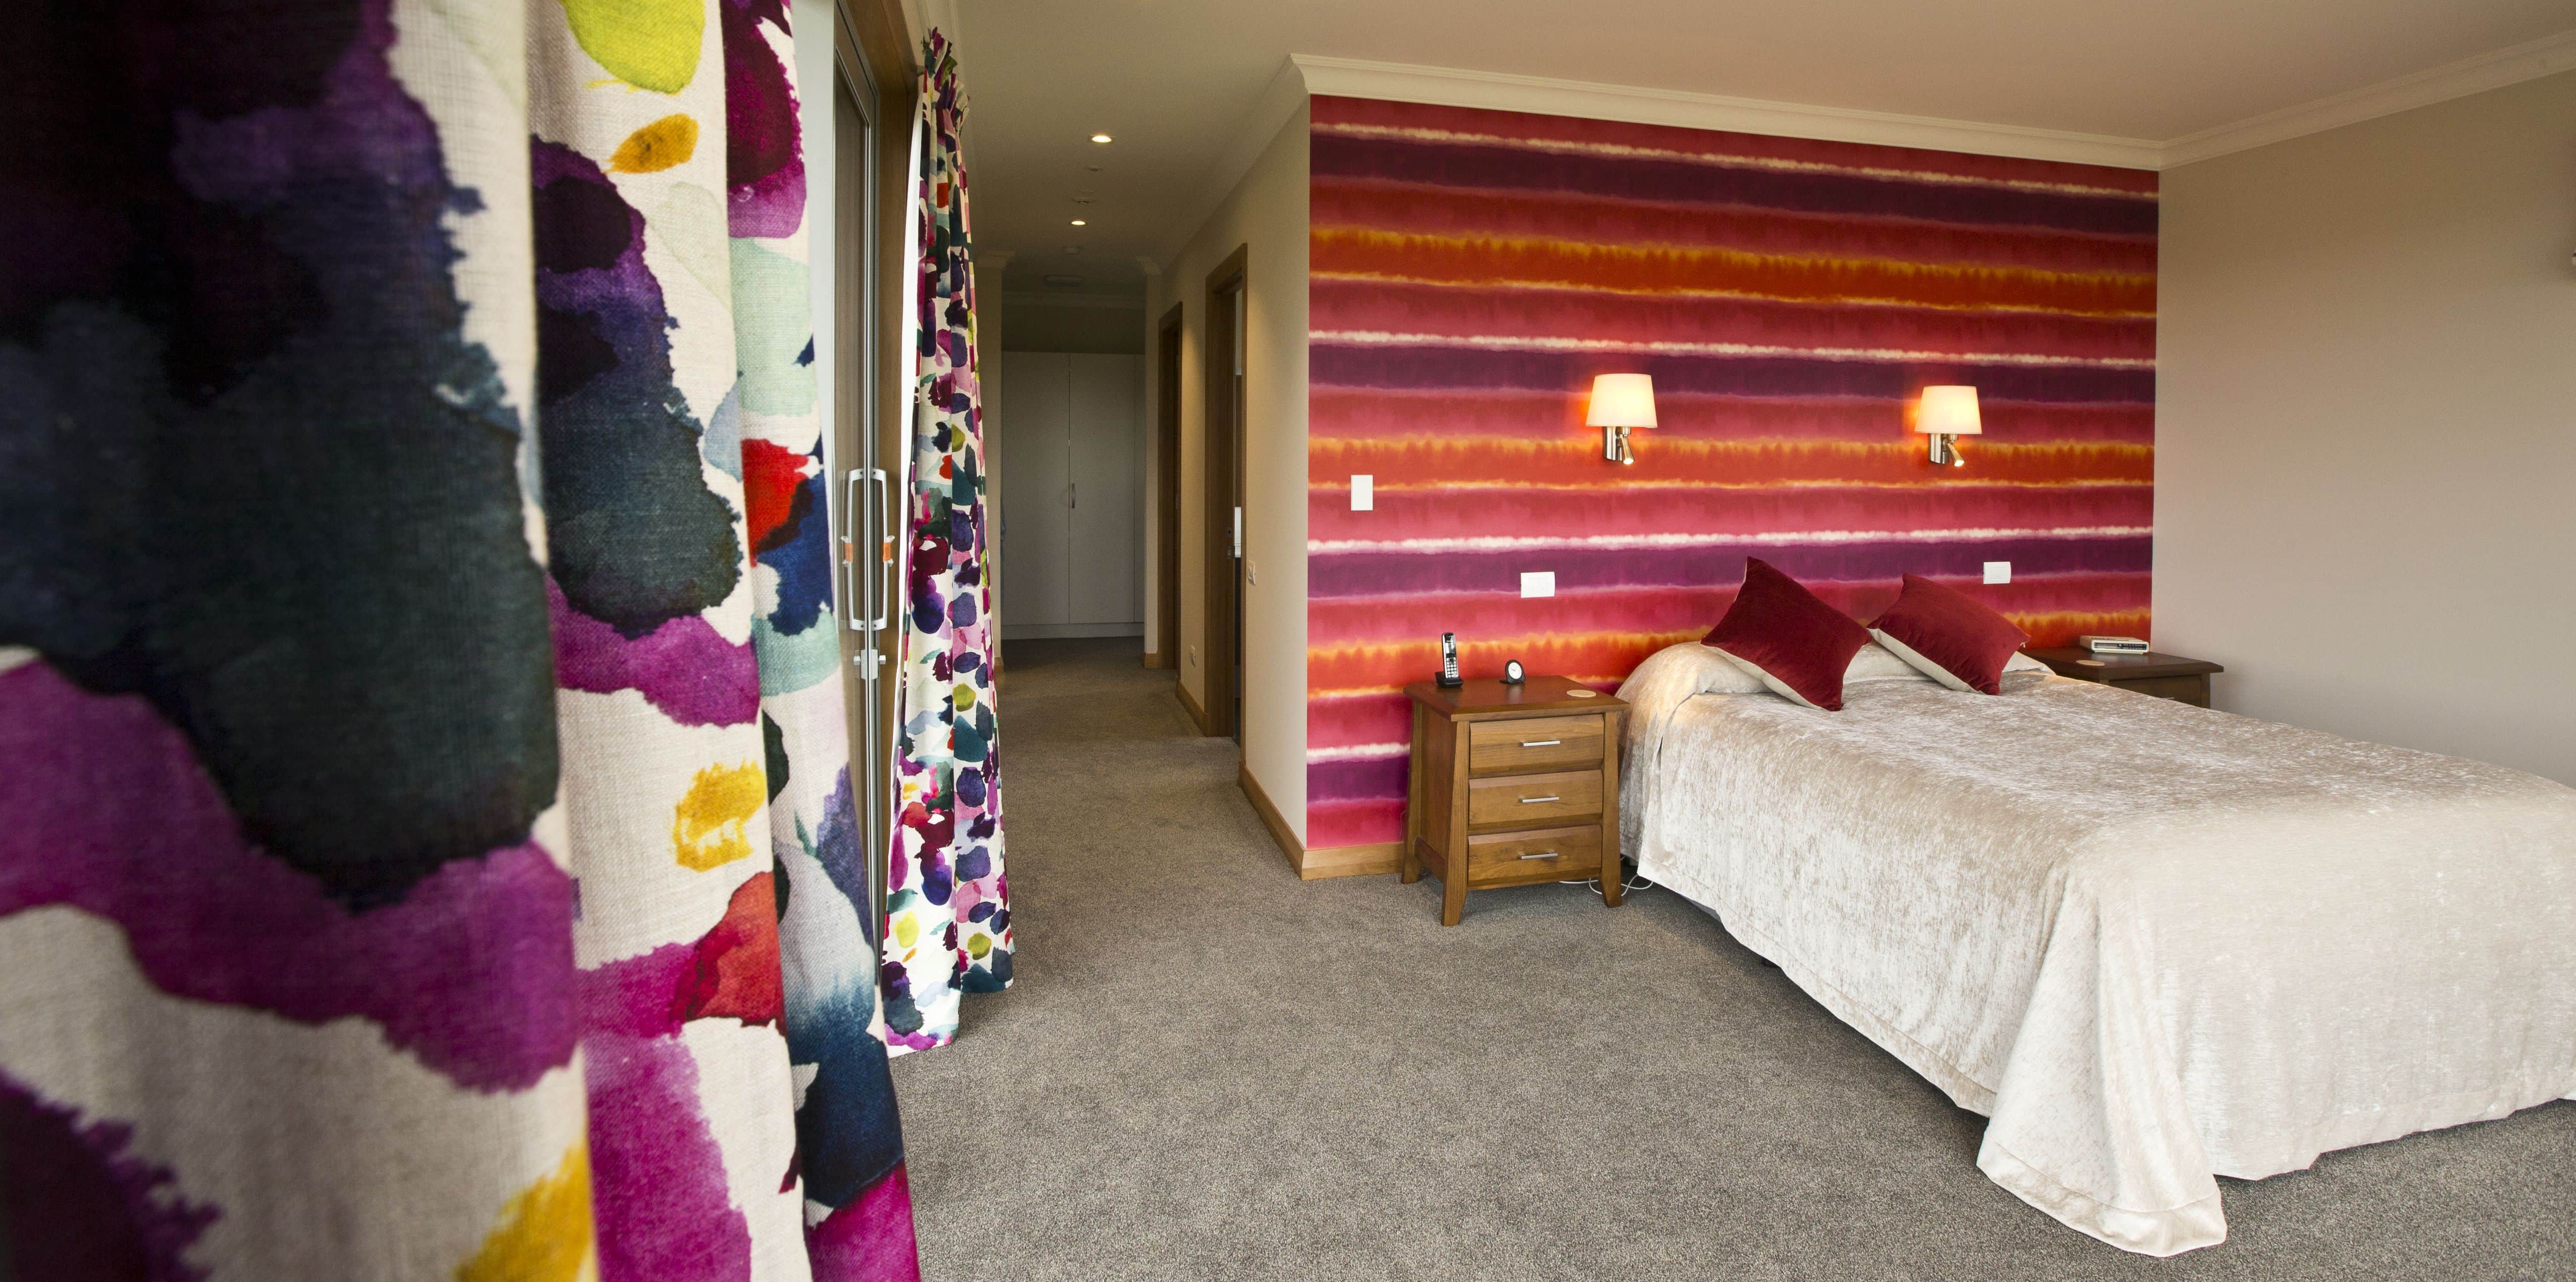  The main bedroom from another angle to show off the vibrant wallpaper